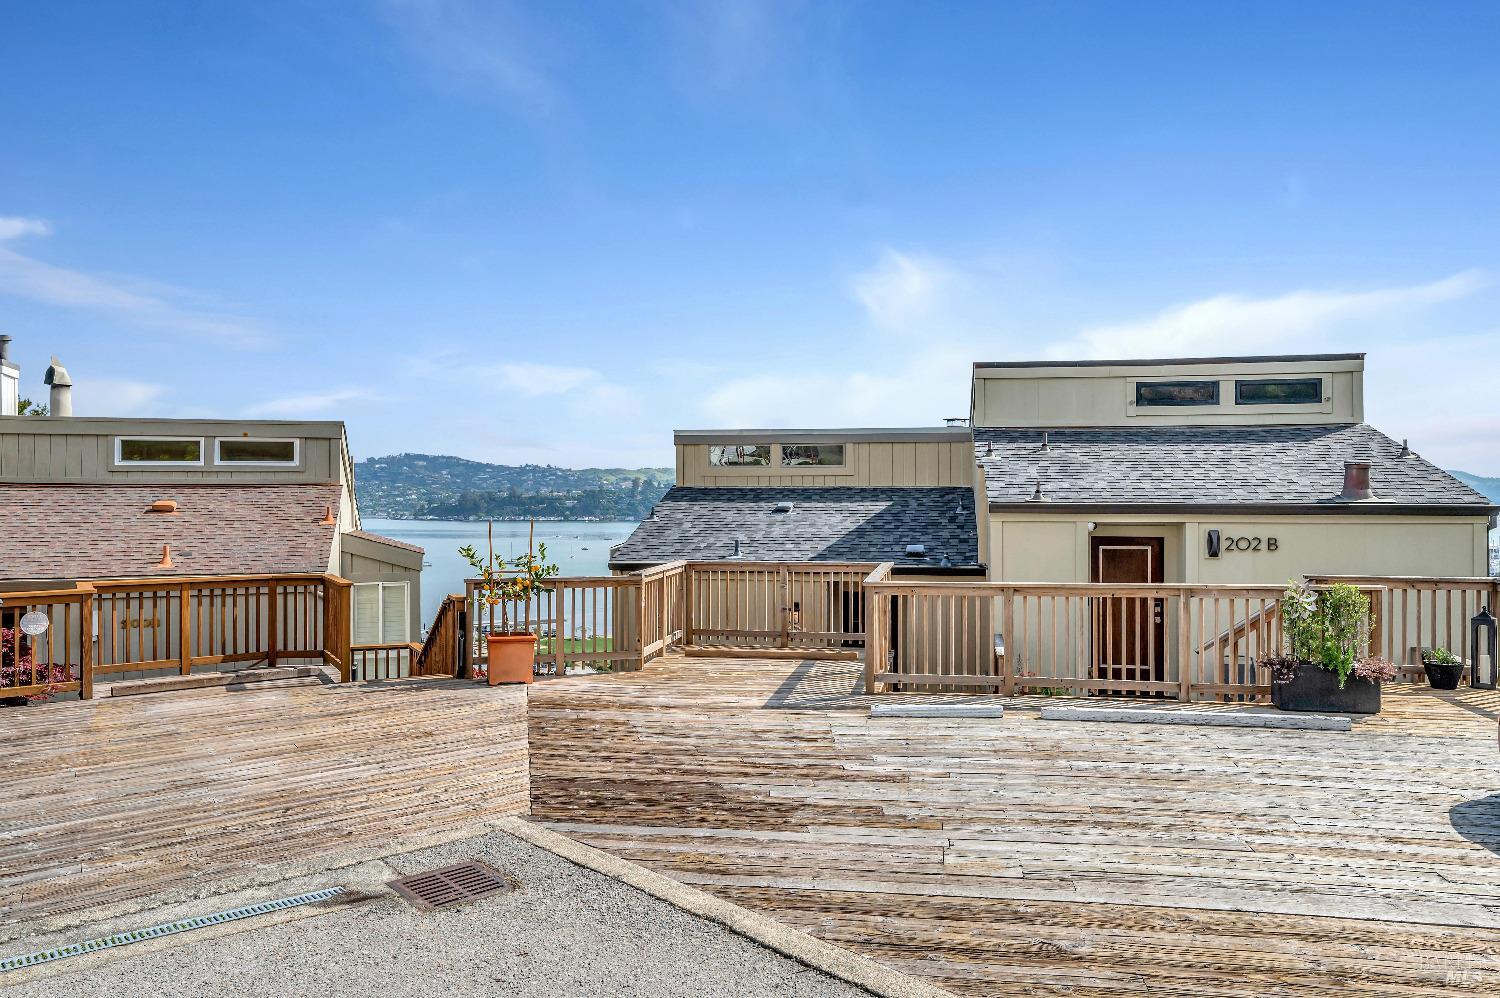 Nestled in the coveted Banana Belt, this charming contemporary home boasts stunning views of the Bay